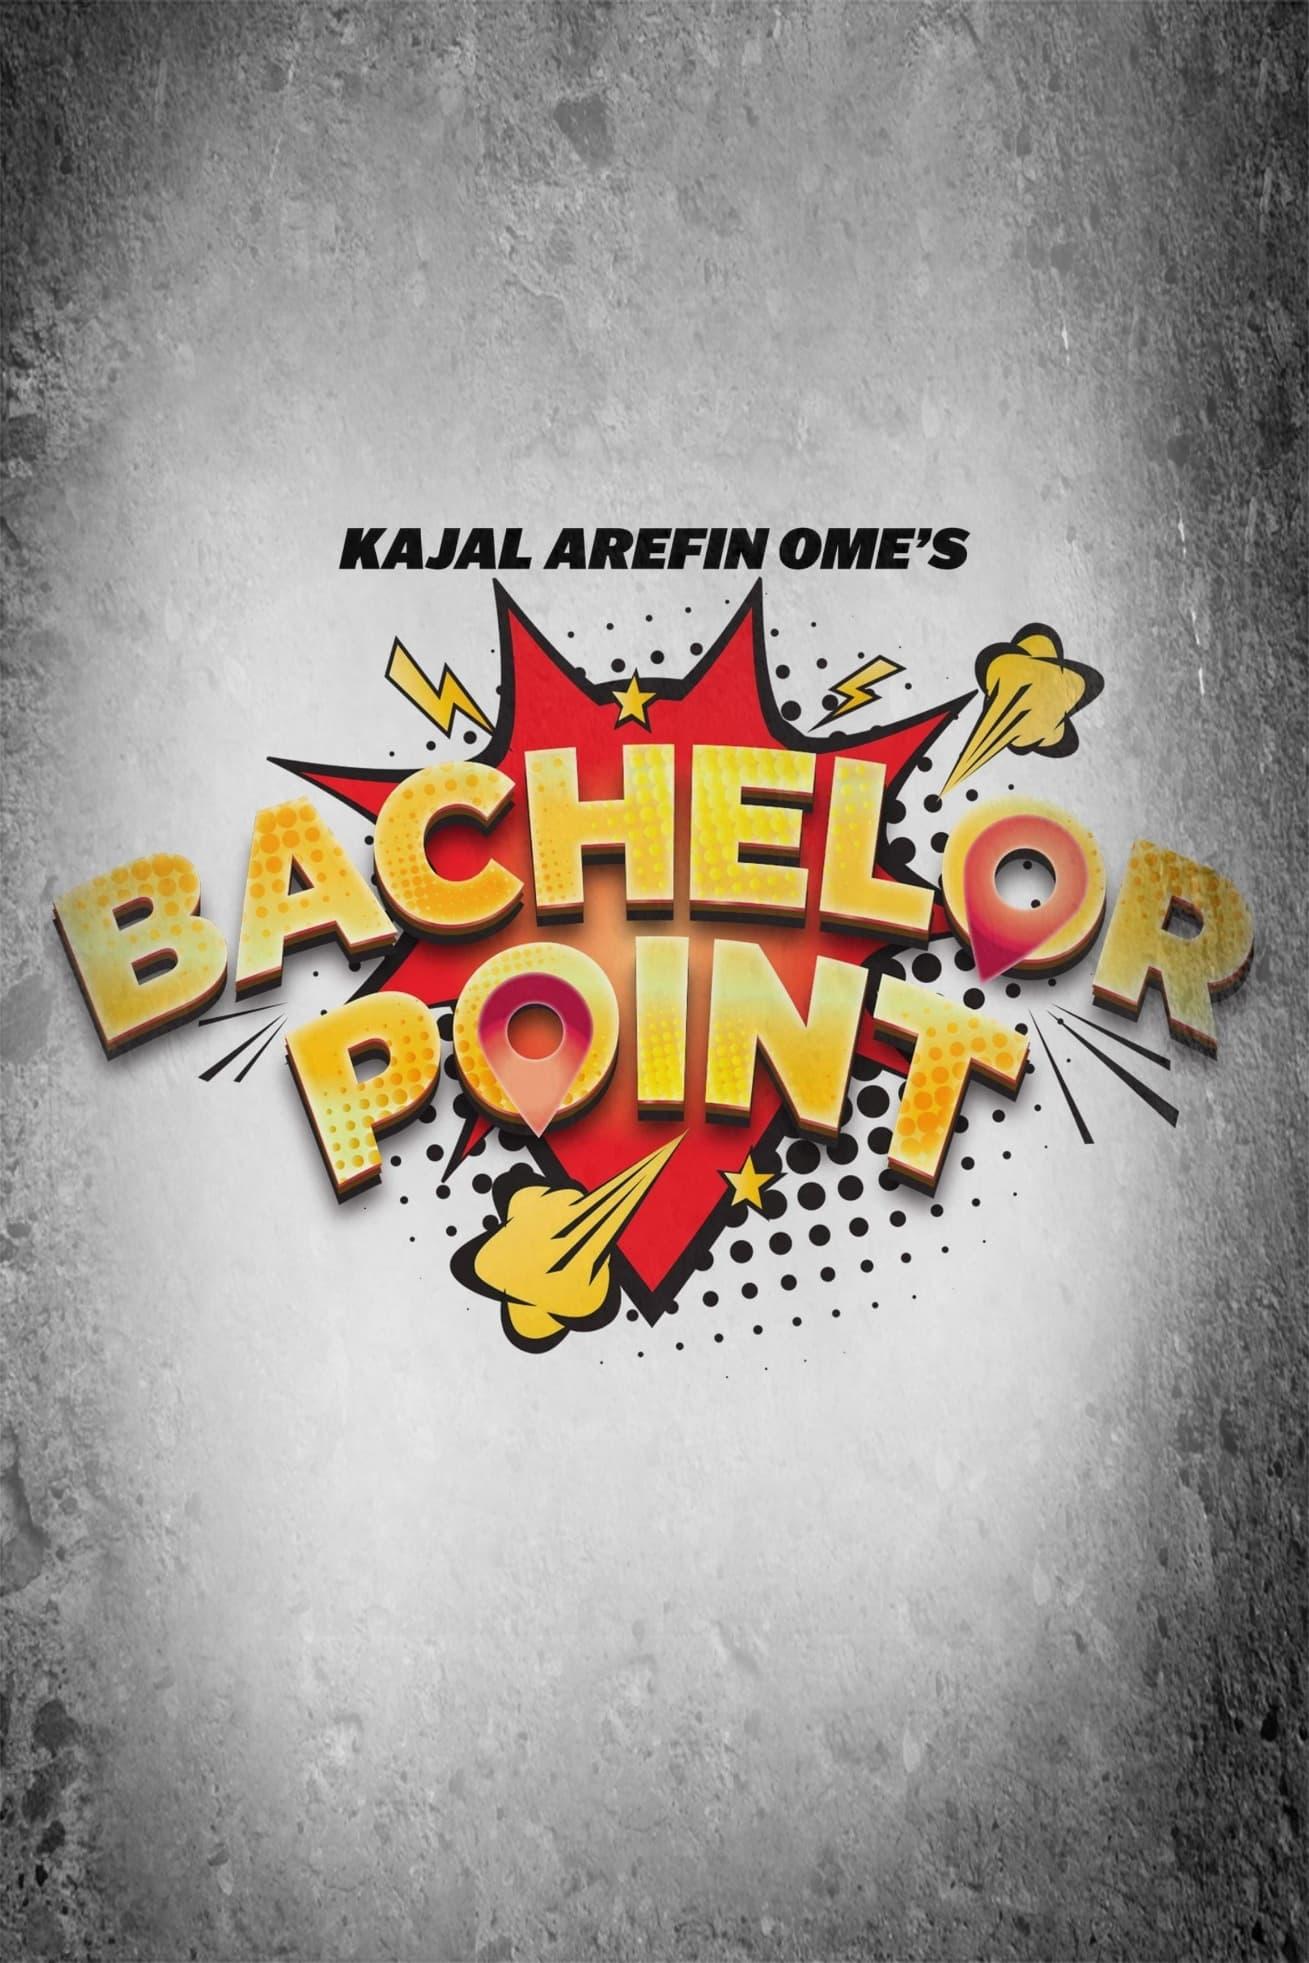 Bachelor Point poster